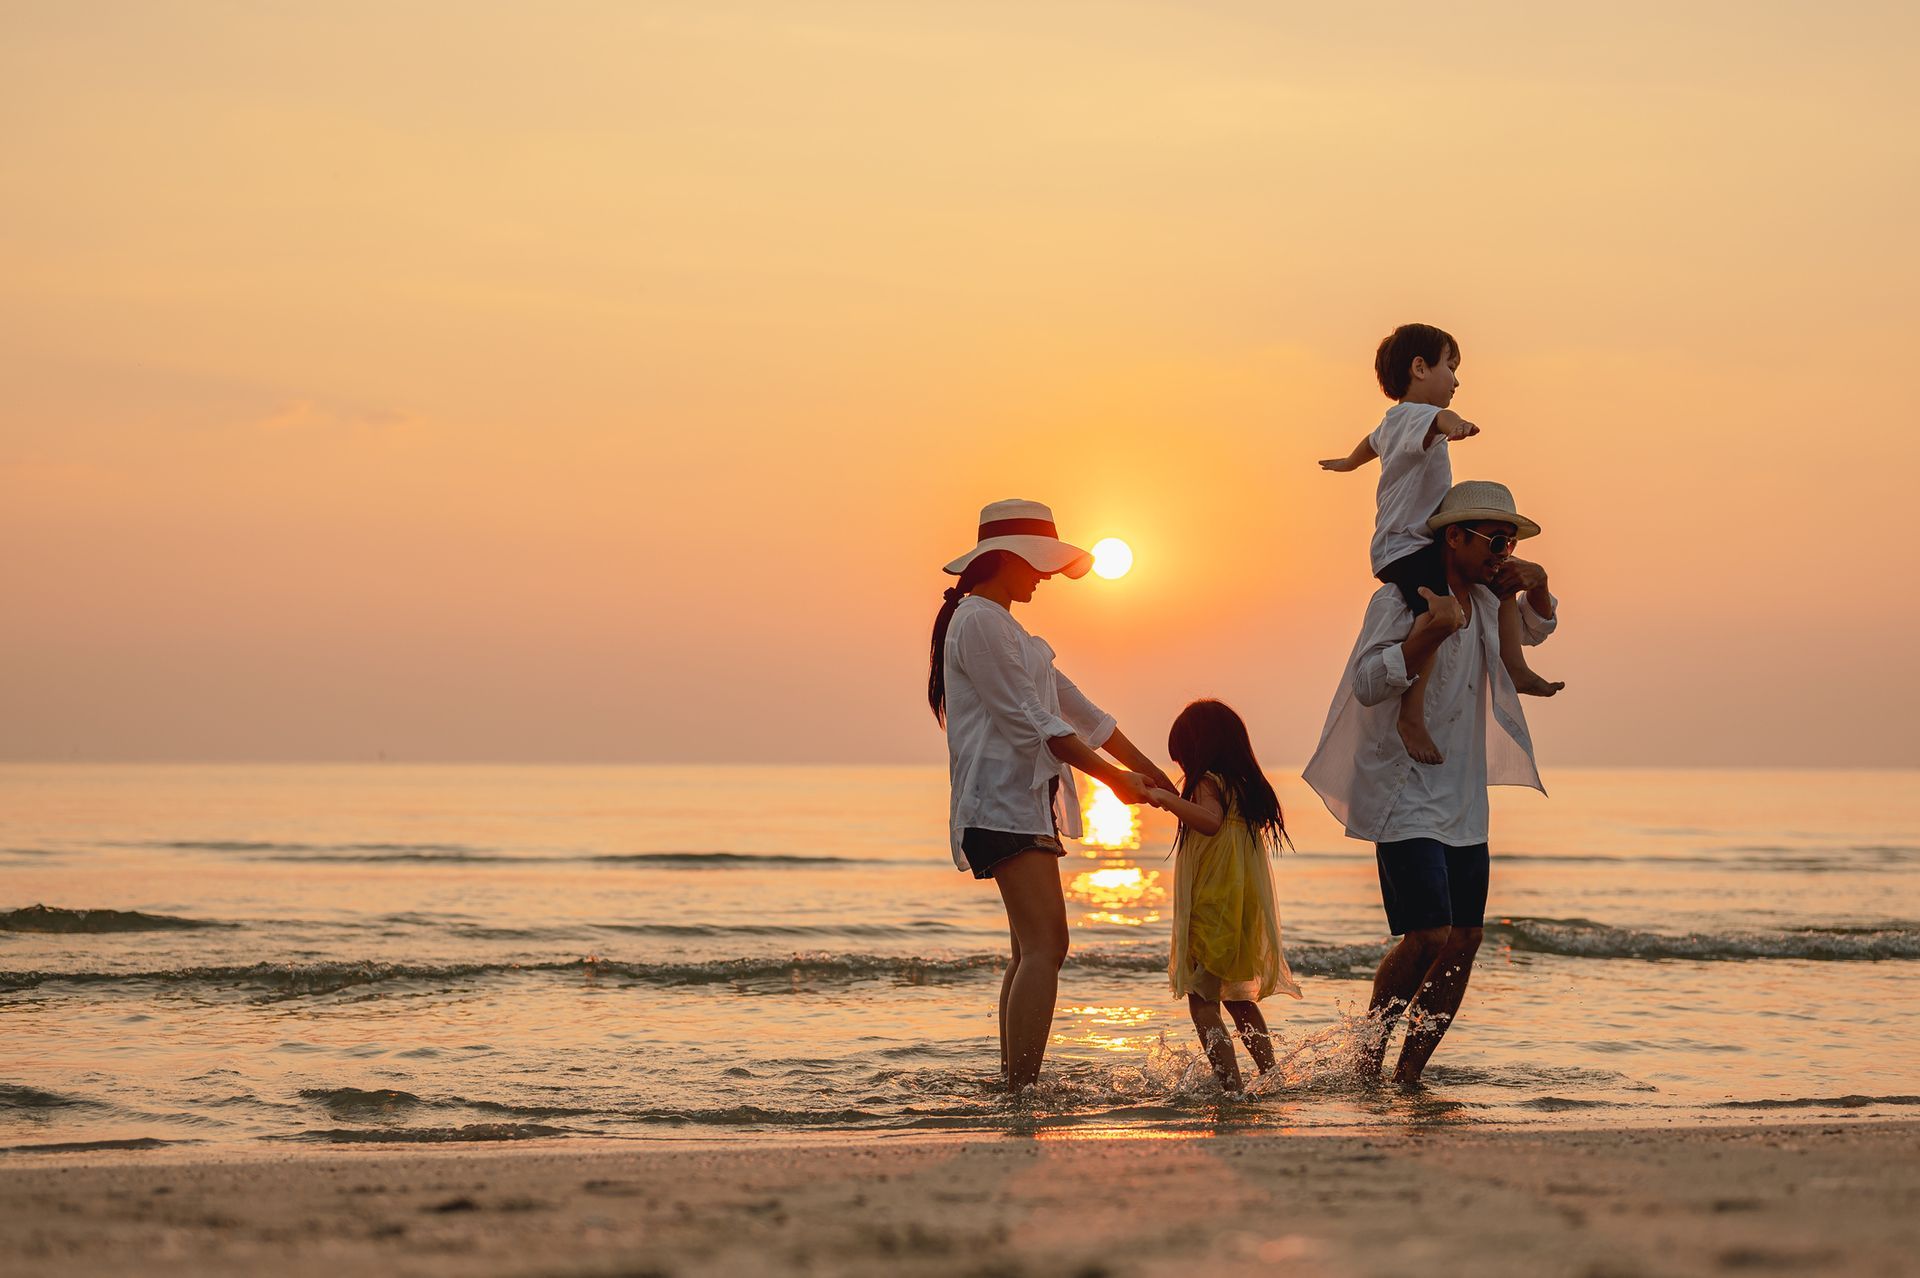 A family is walking on the beach at sunset.